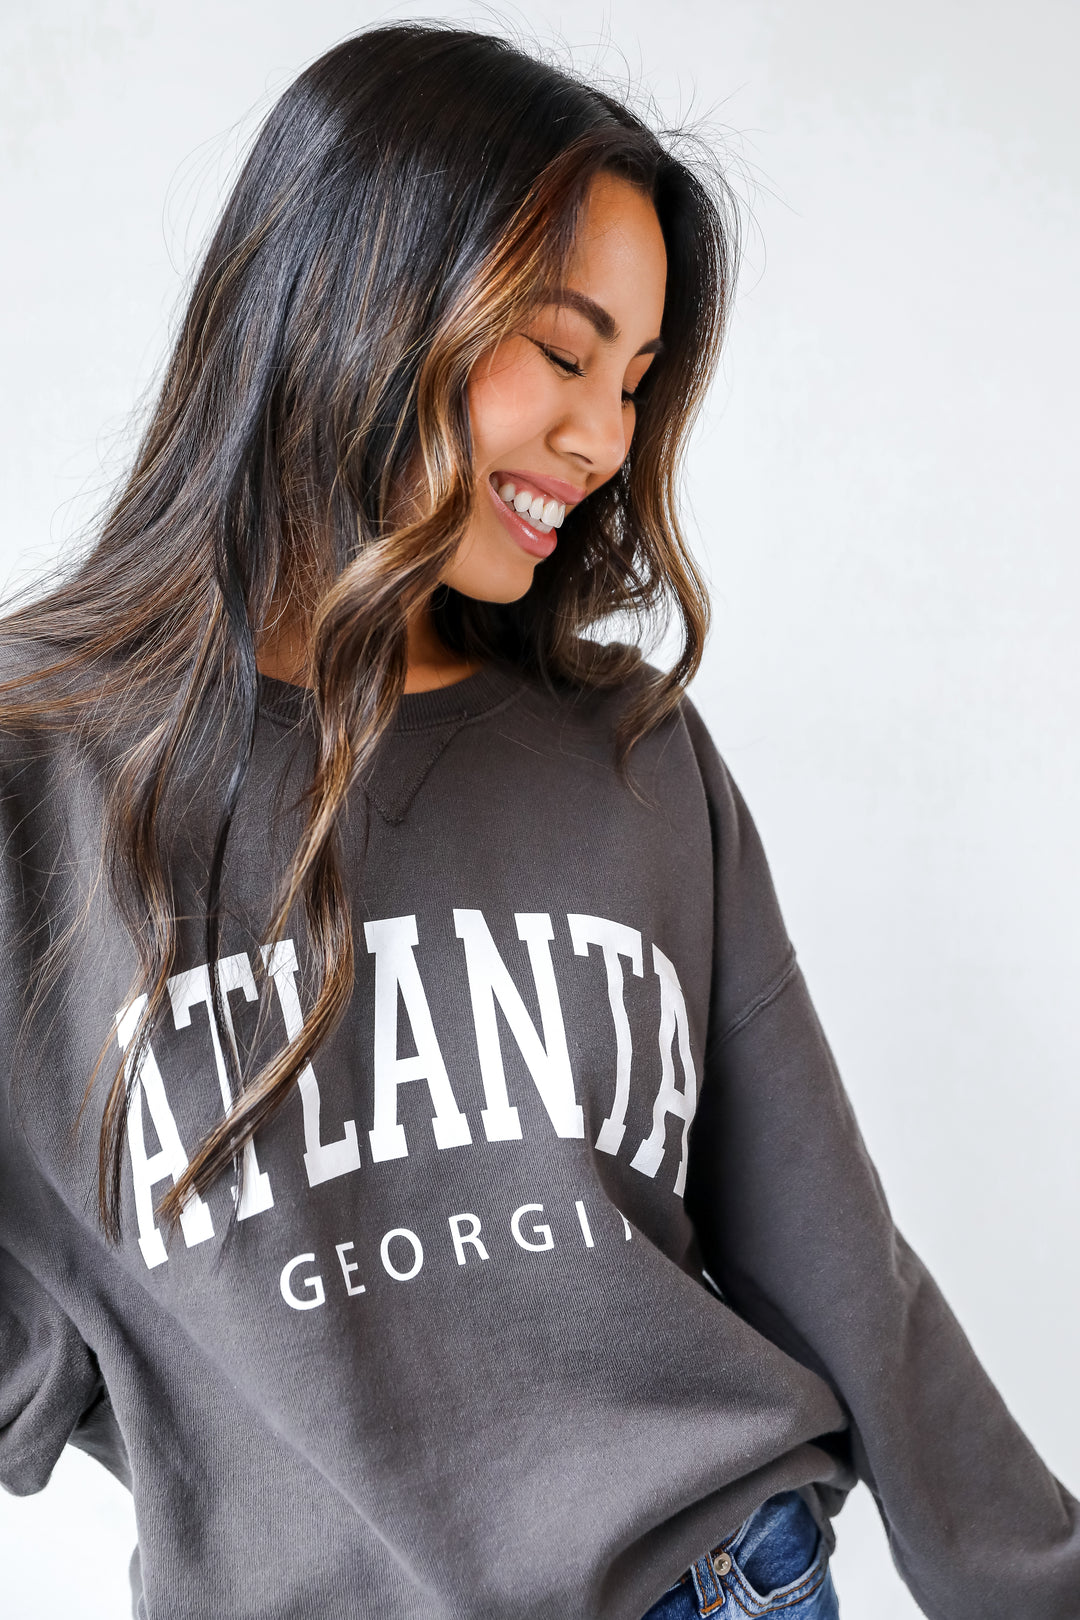 This comfy sweatshirt is designed with a soft and stretchy knit with a fleece interior. It features a crew neckline, long sleeves, a relaxed fit, and the words "Atlanta Georgia" on the front.